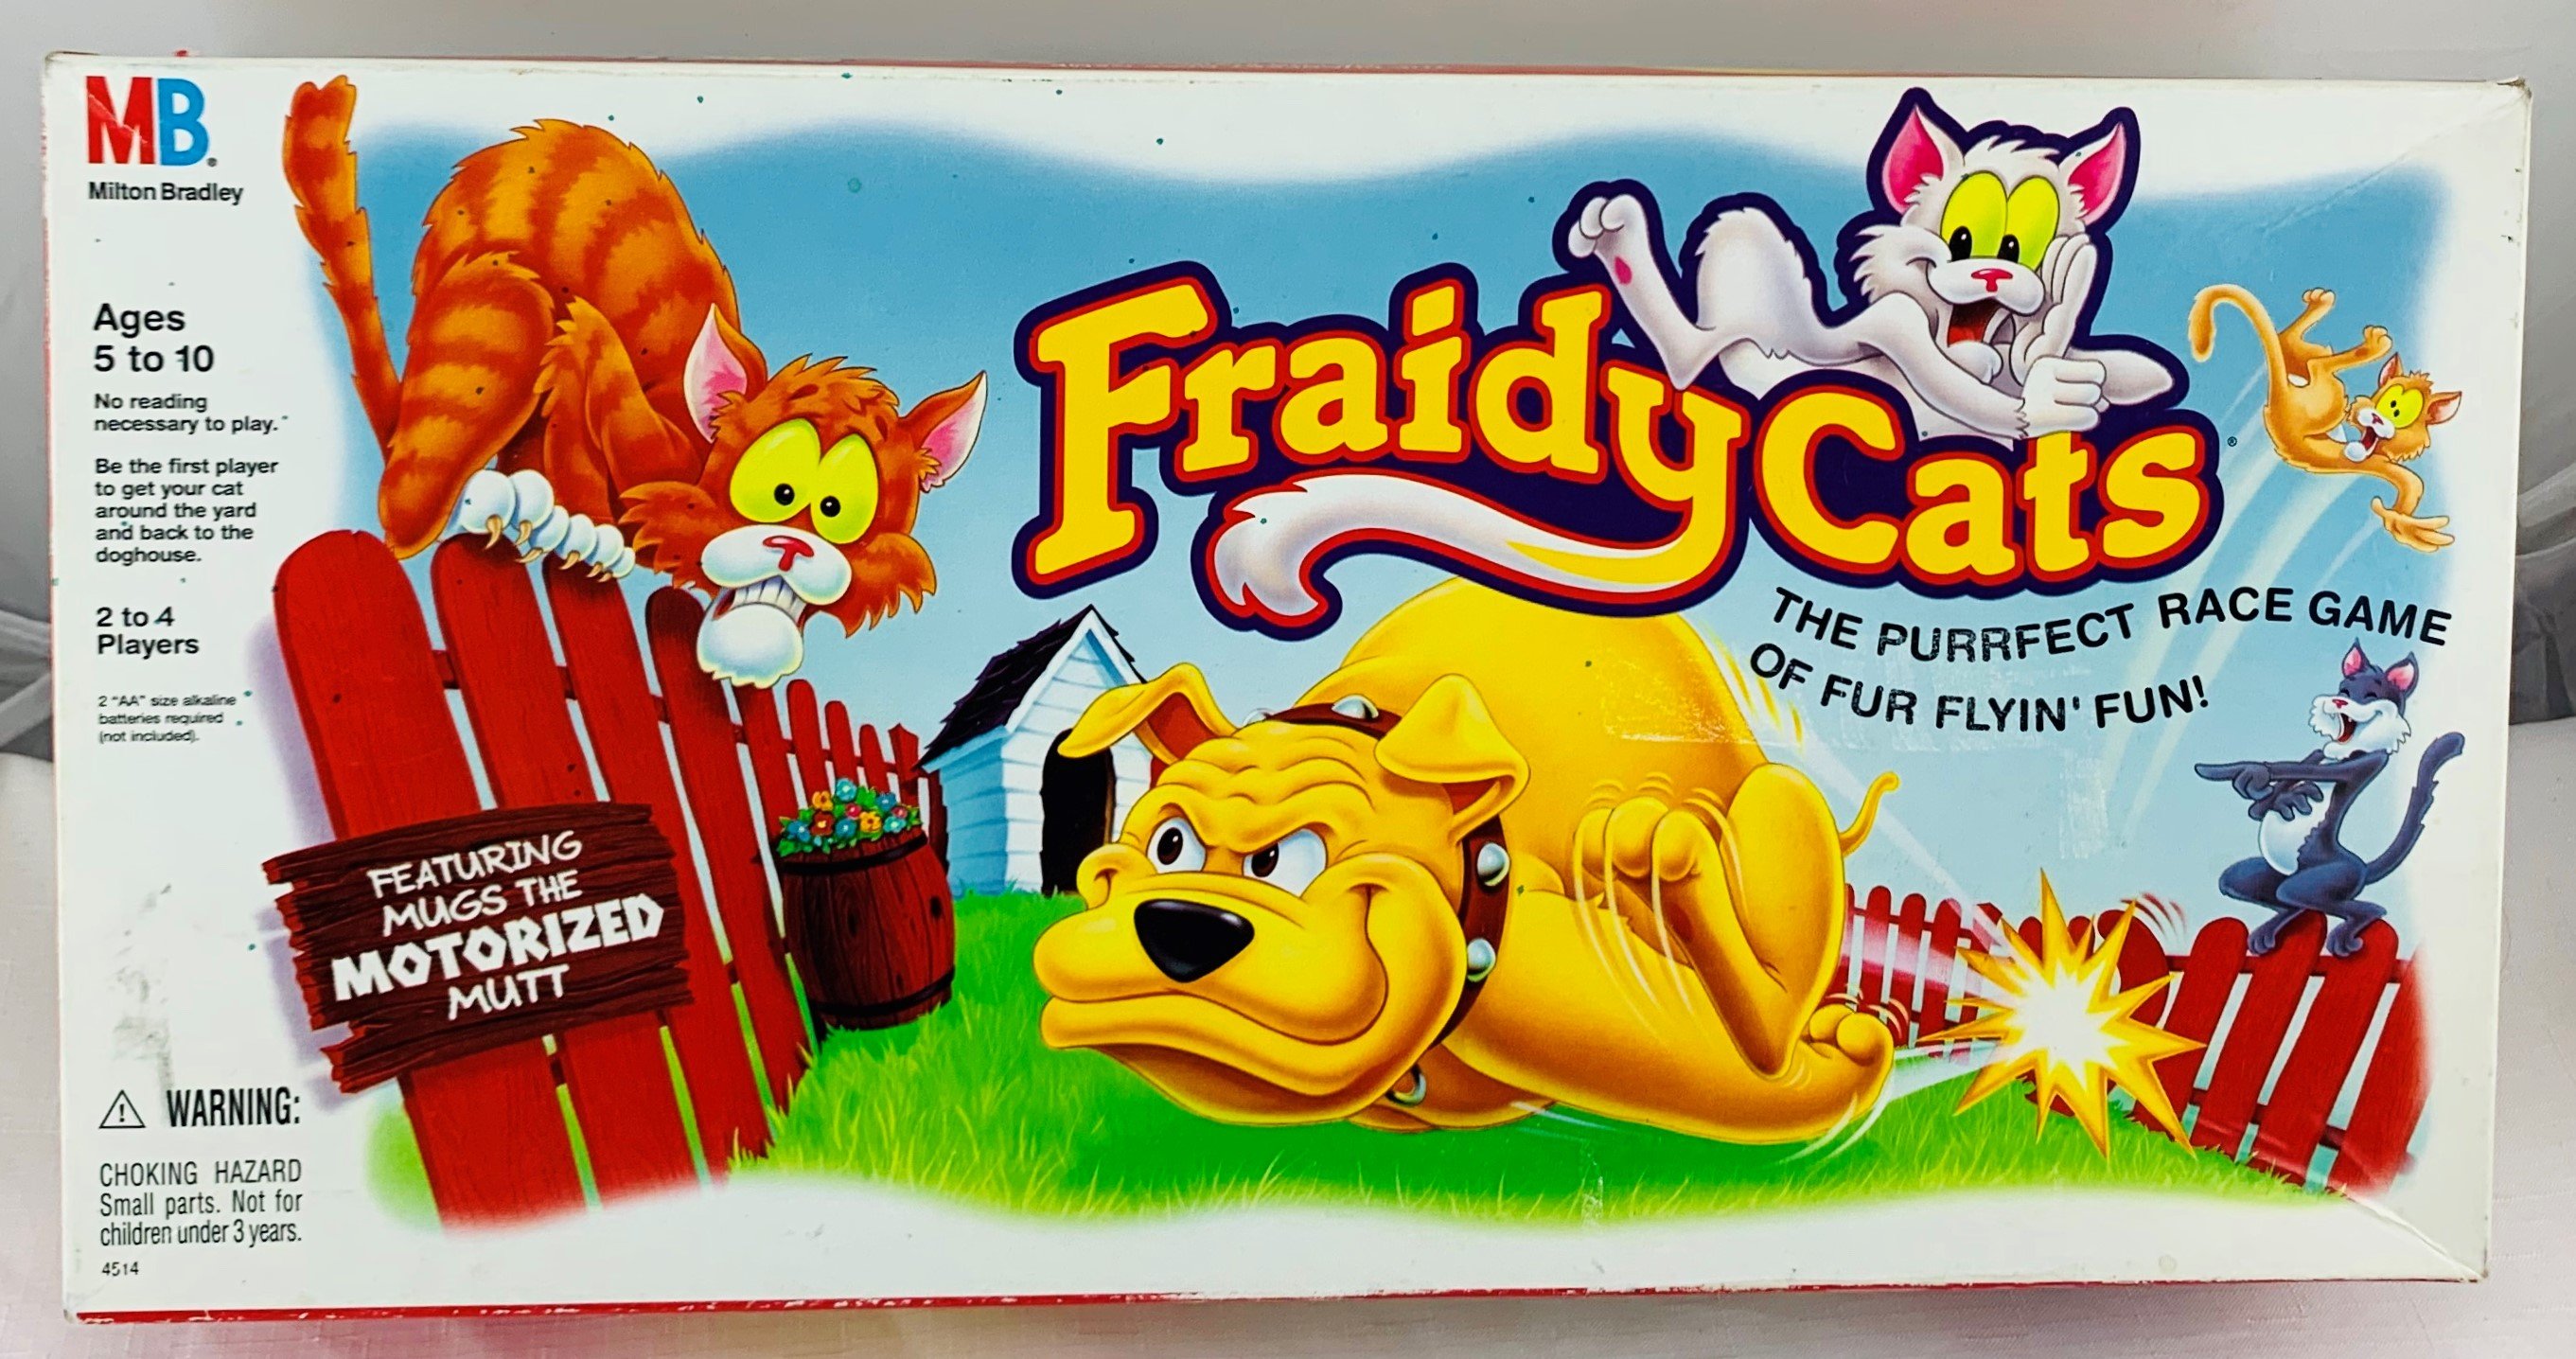 1990s Board Games: Fraidy Cats